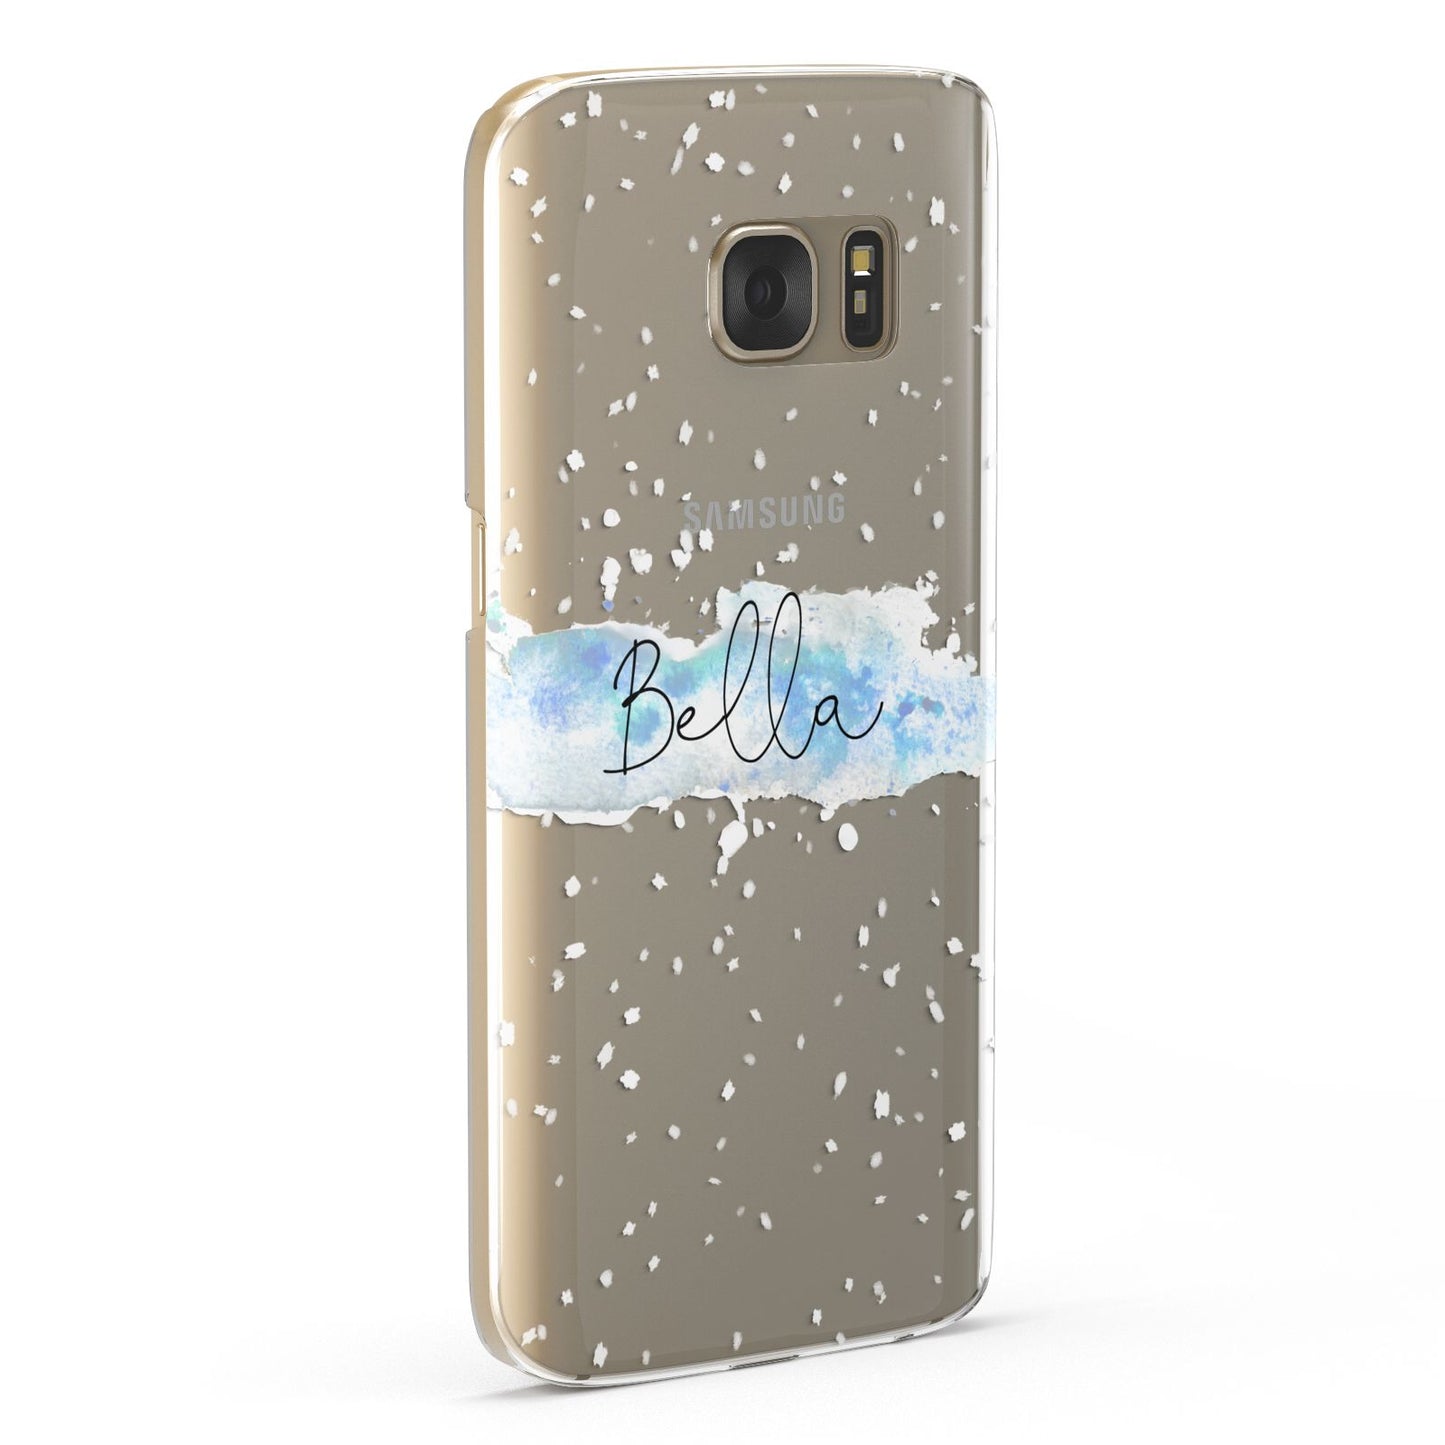 Personalised Christmas Snow fall Samsung Galaxy Case Fourty Five Degrees